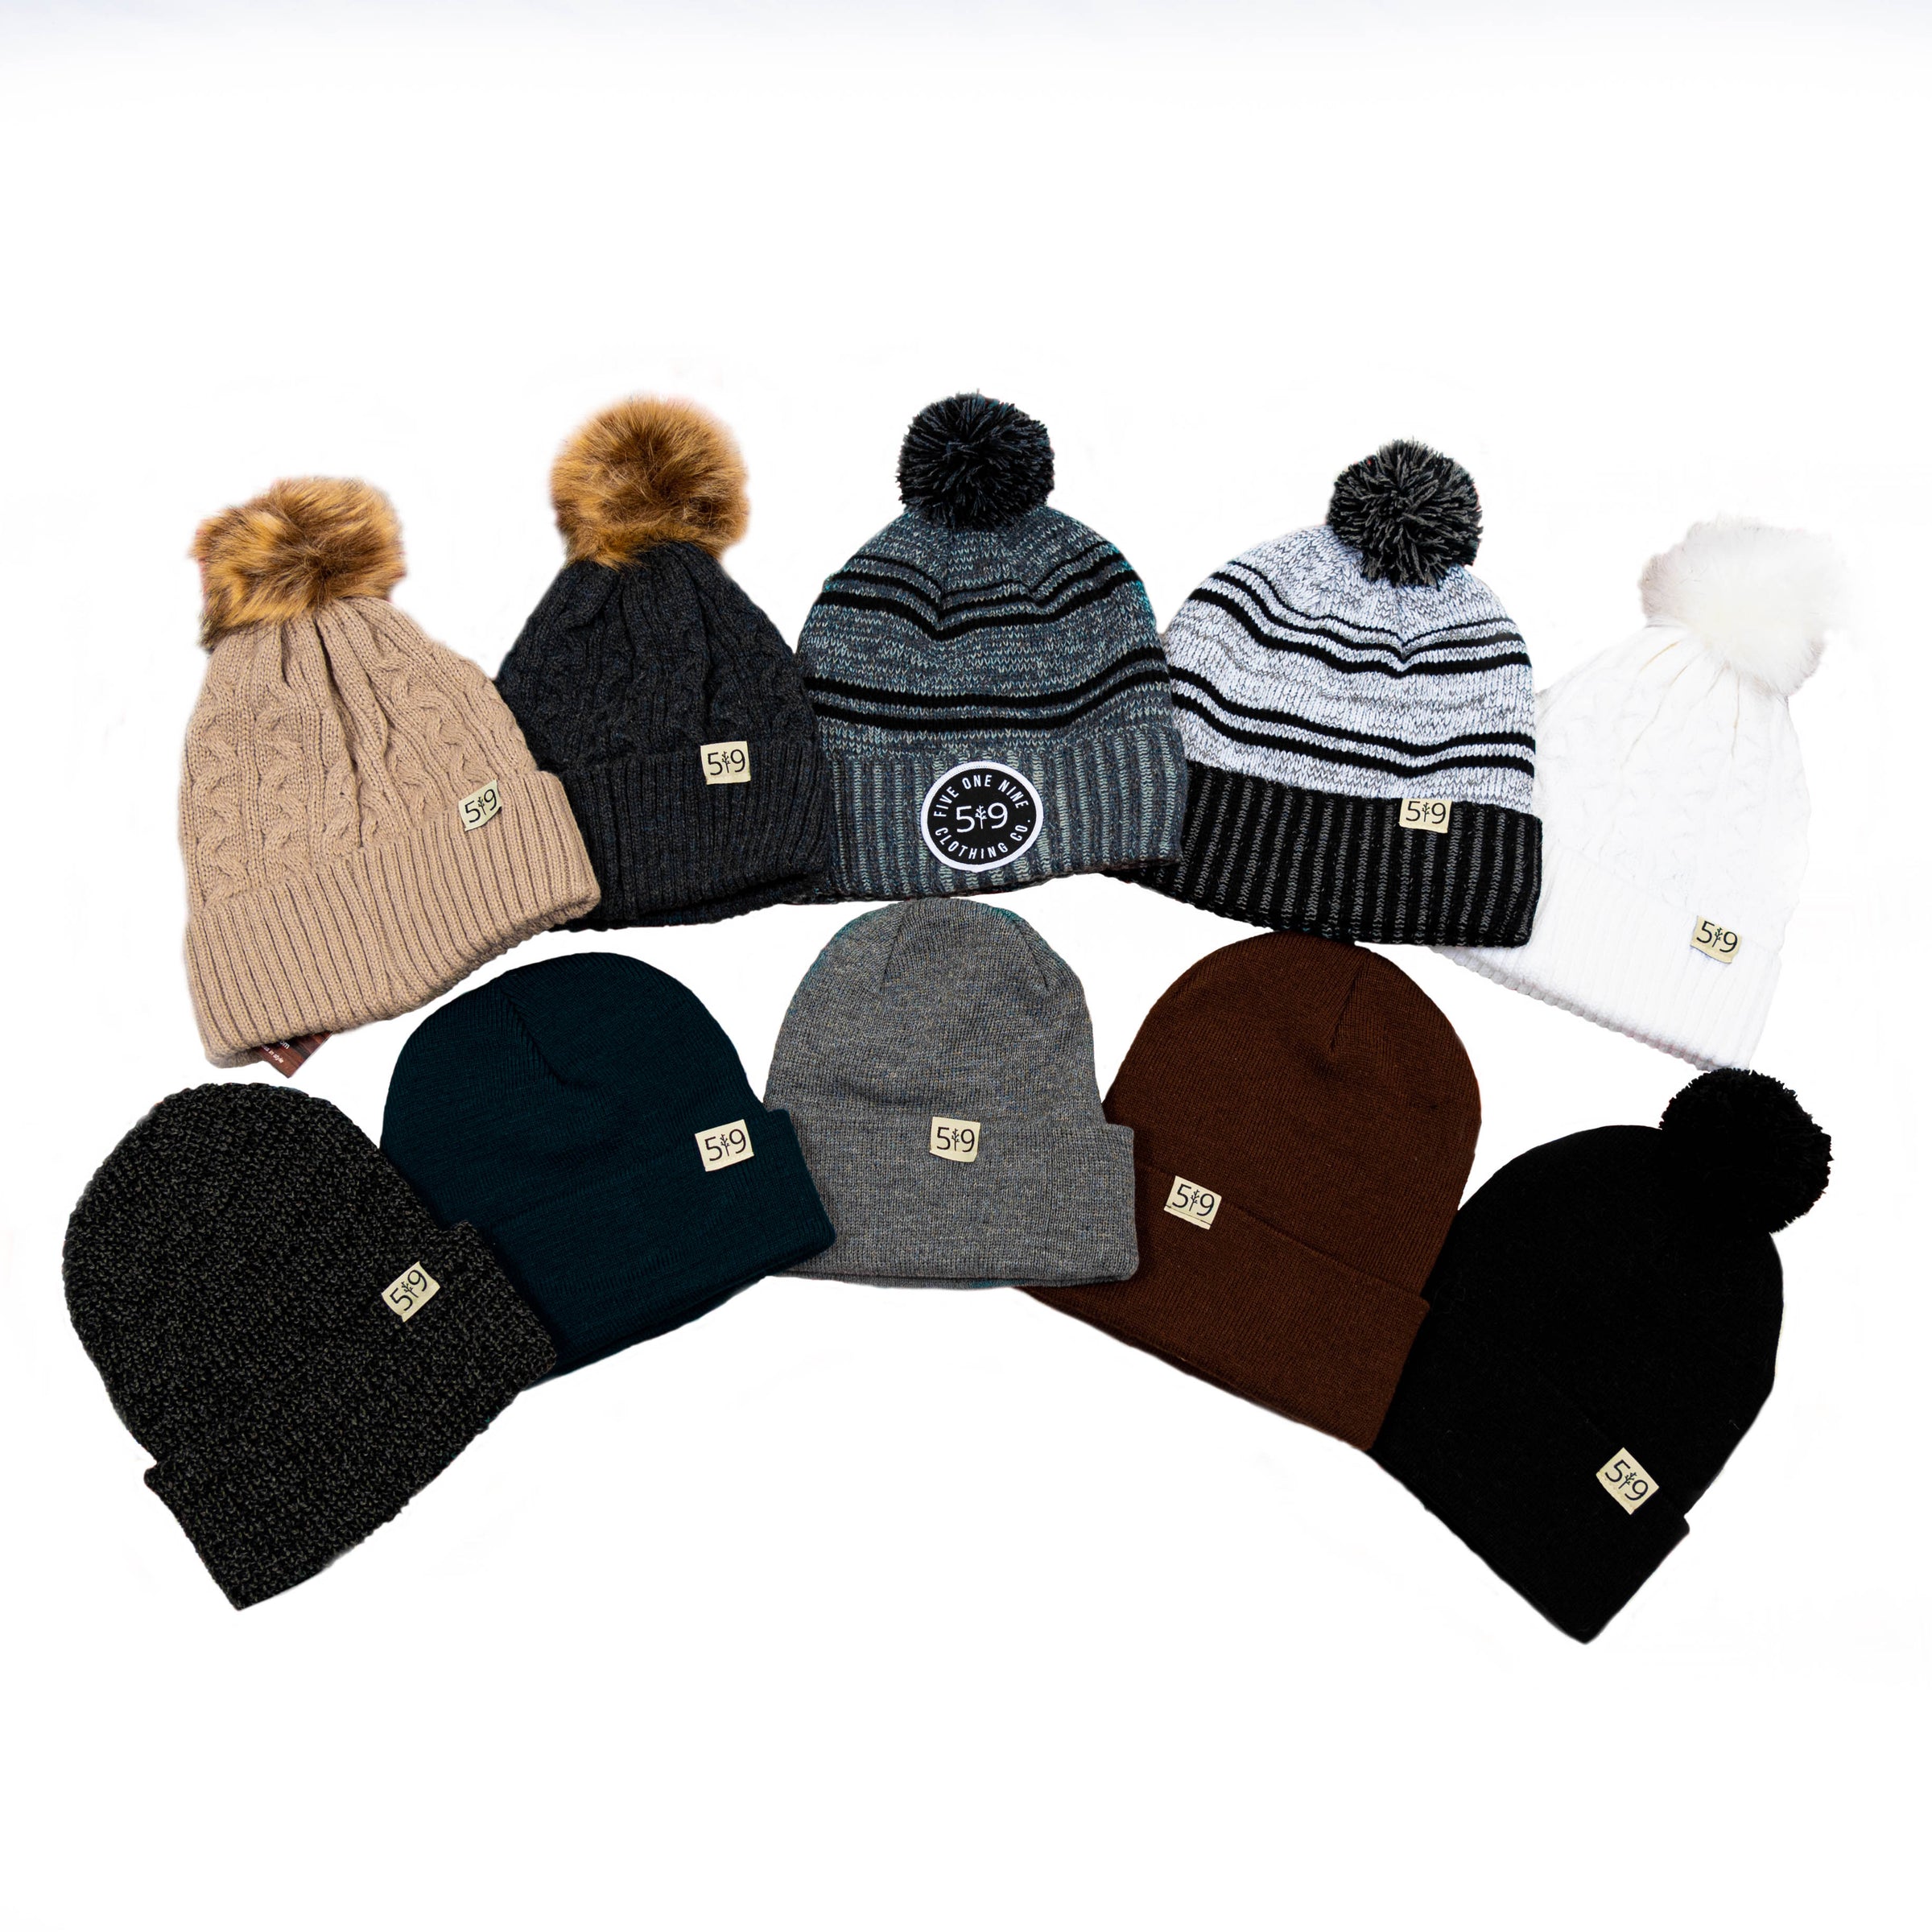 HATS AND TOQUES (WOMENS)